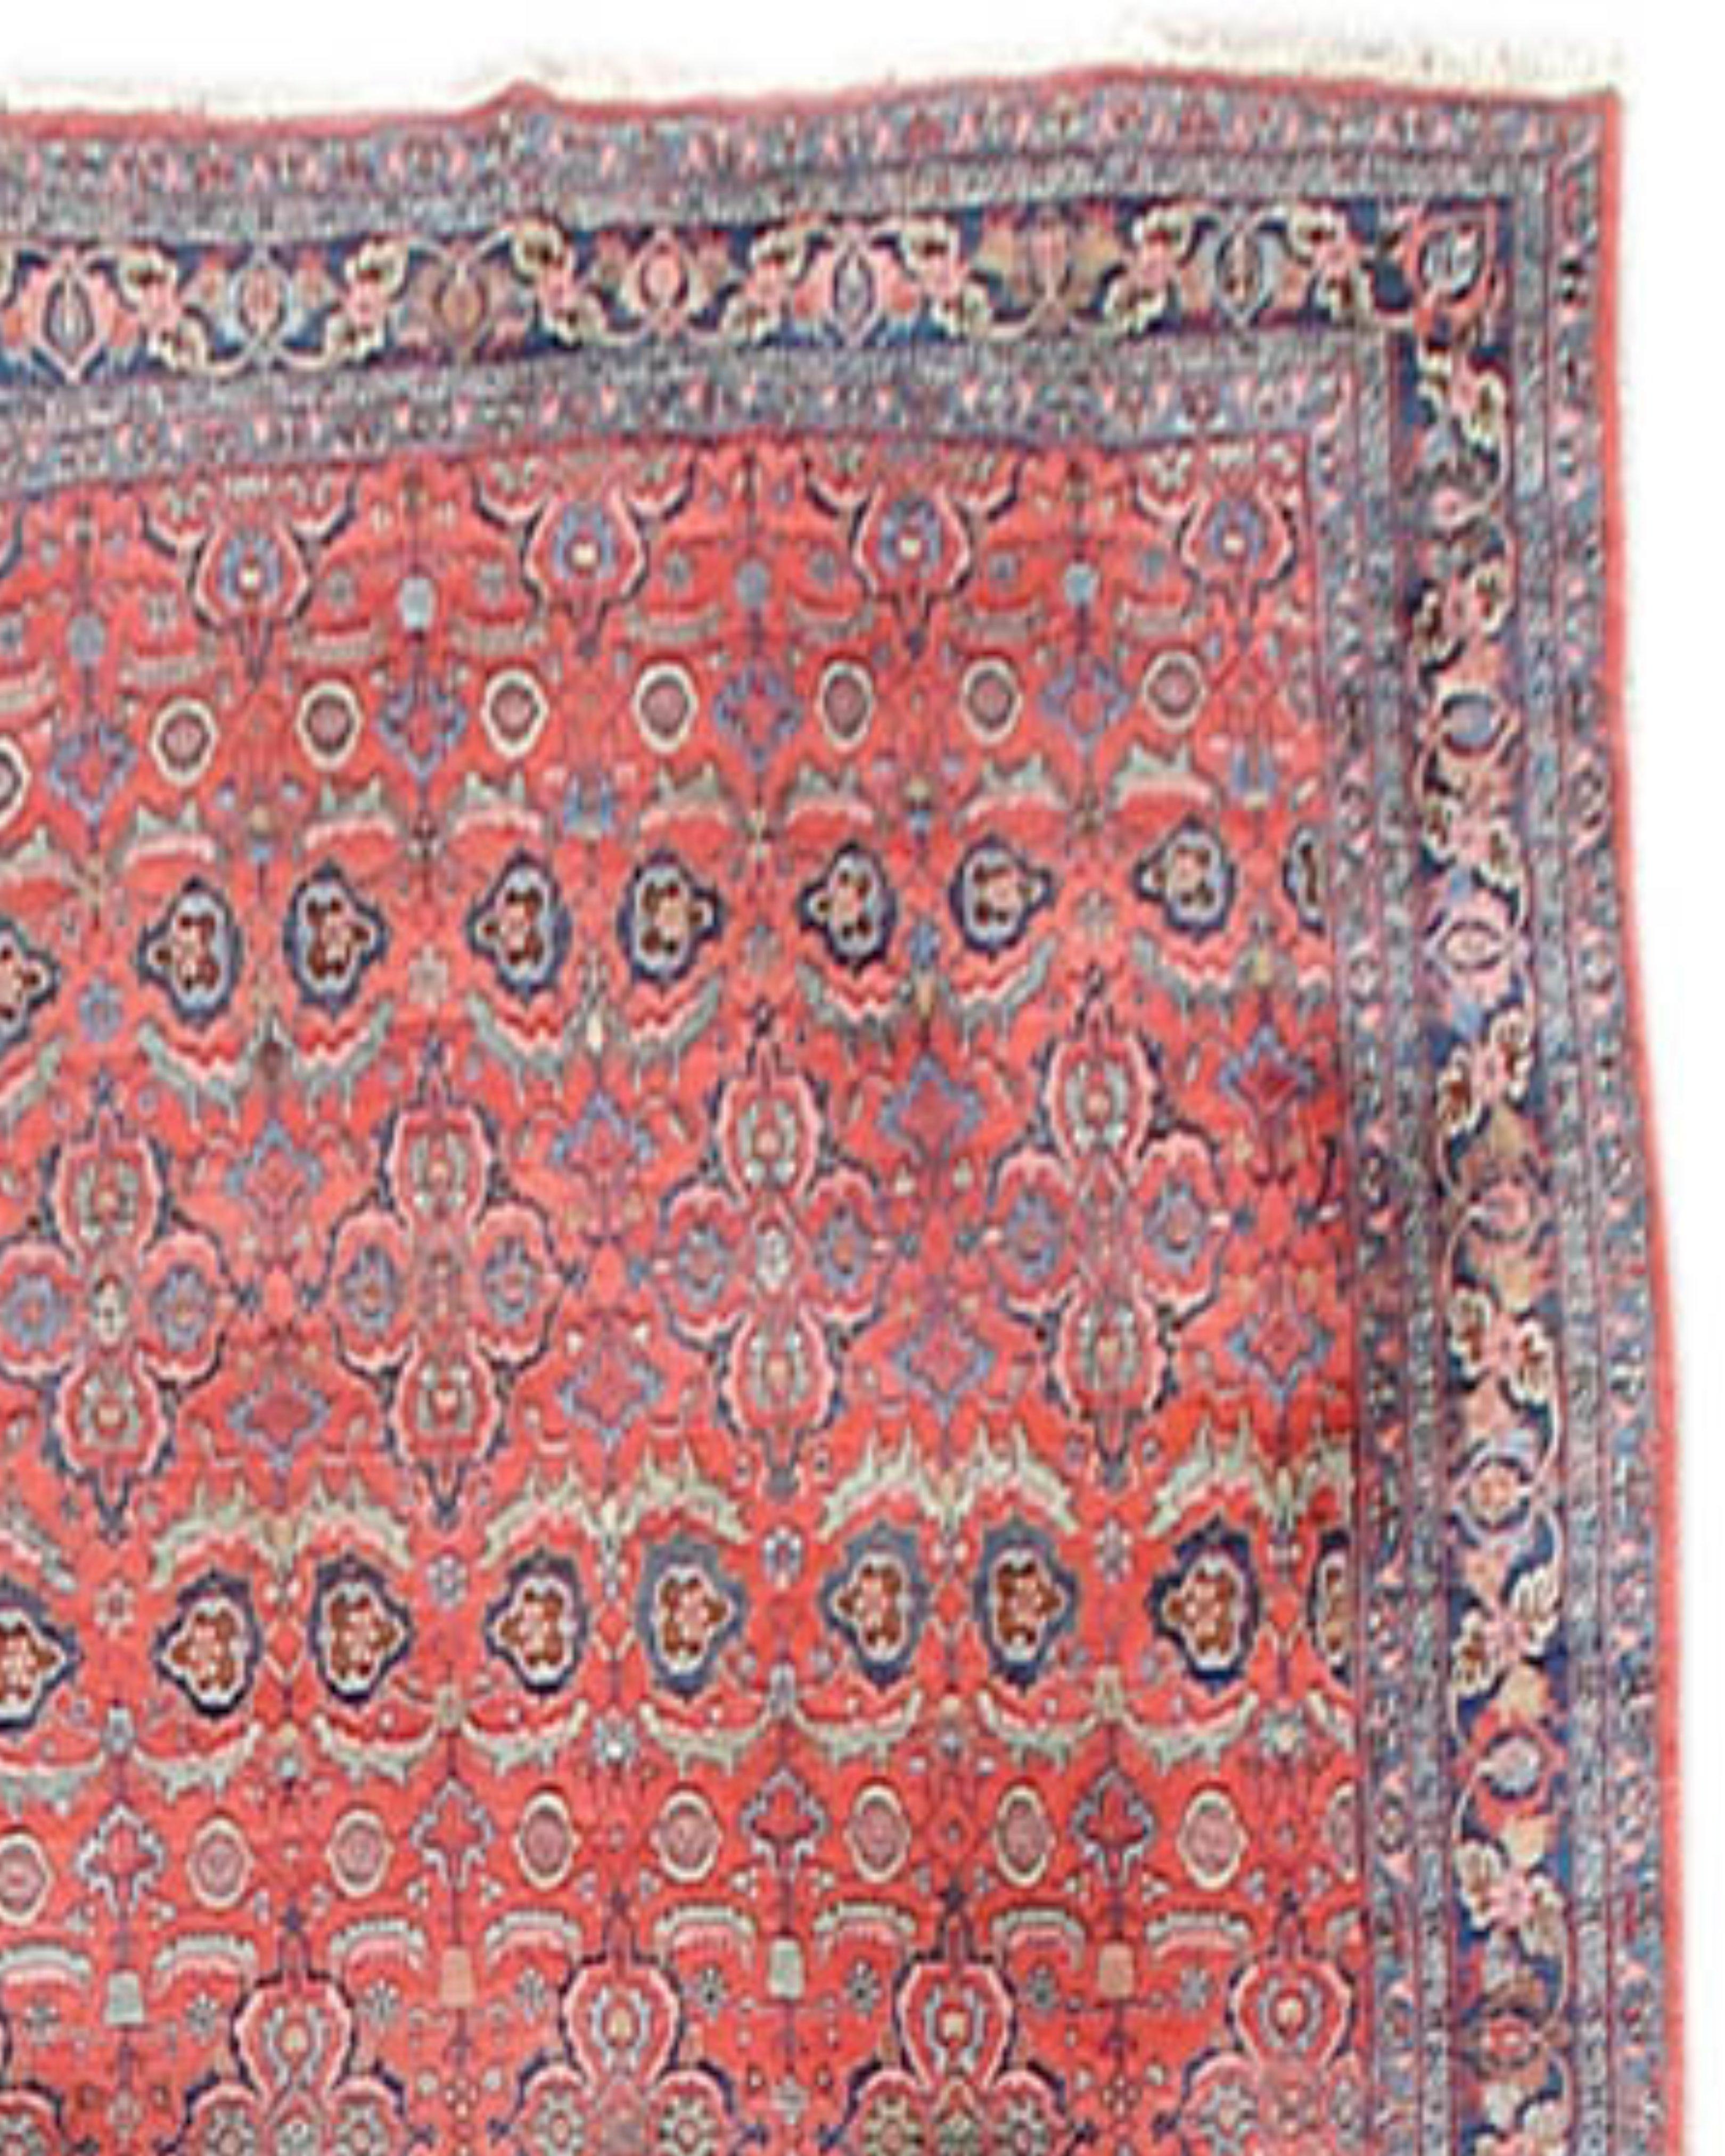 Large Antique Persian Bidjar Rug, Early 20th Century

Fine drawing combined with sturdy construction are the hallmarks of great Bidjar carpets. This elegant oversized example is in keeping with some of the best of the genre. Delicate rows of